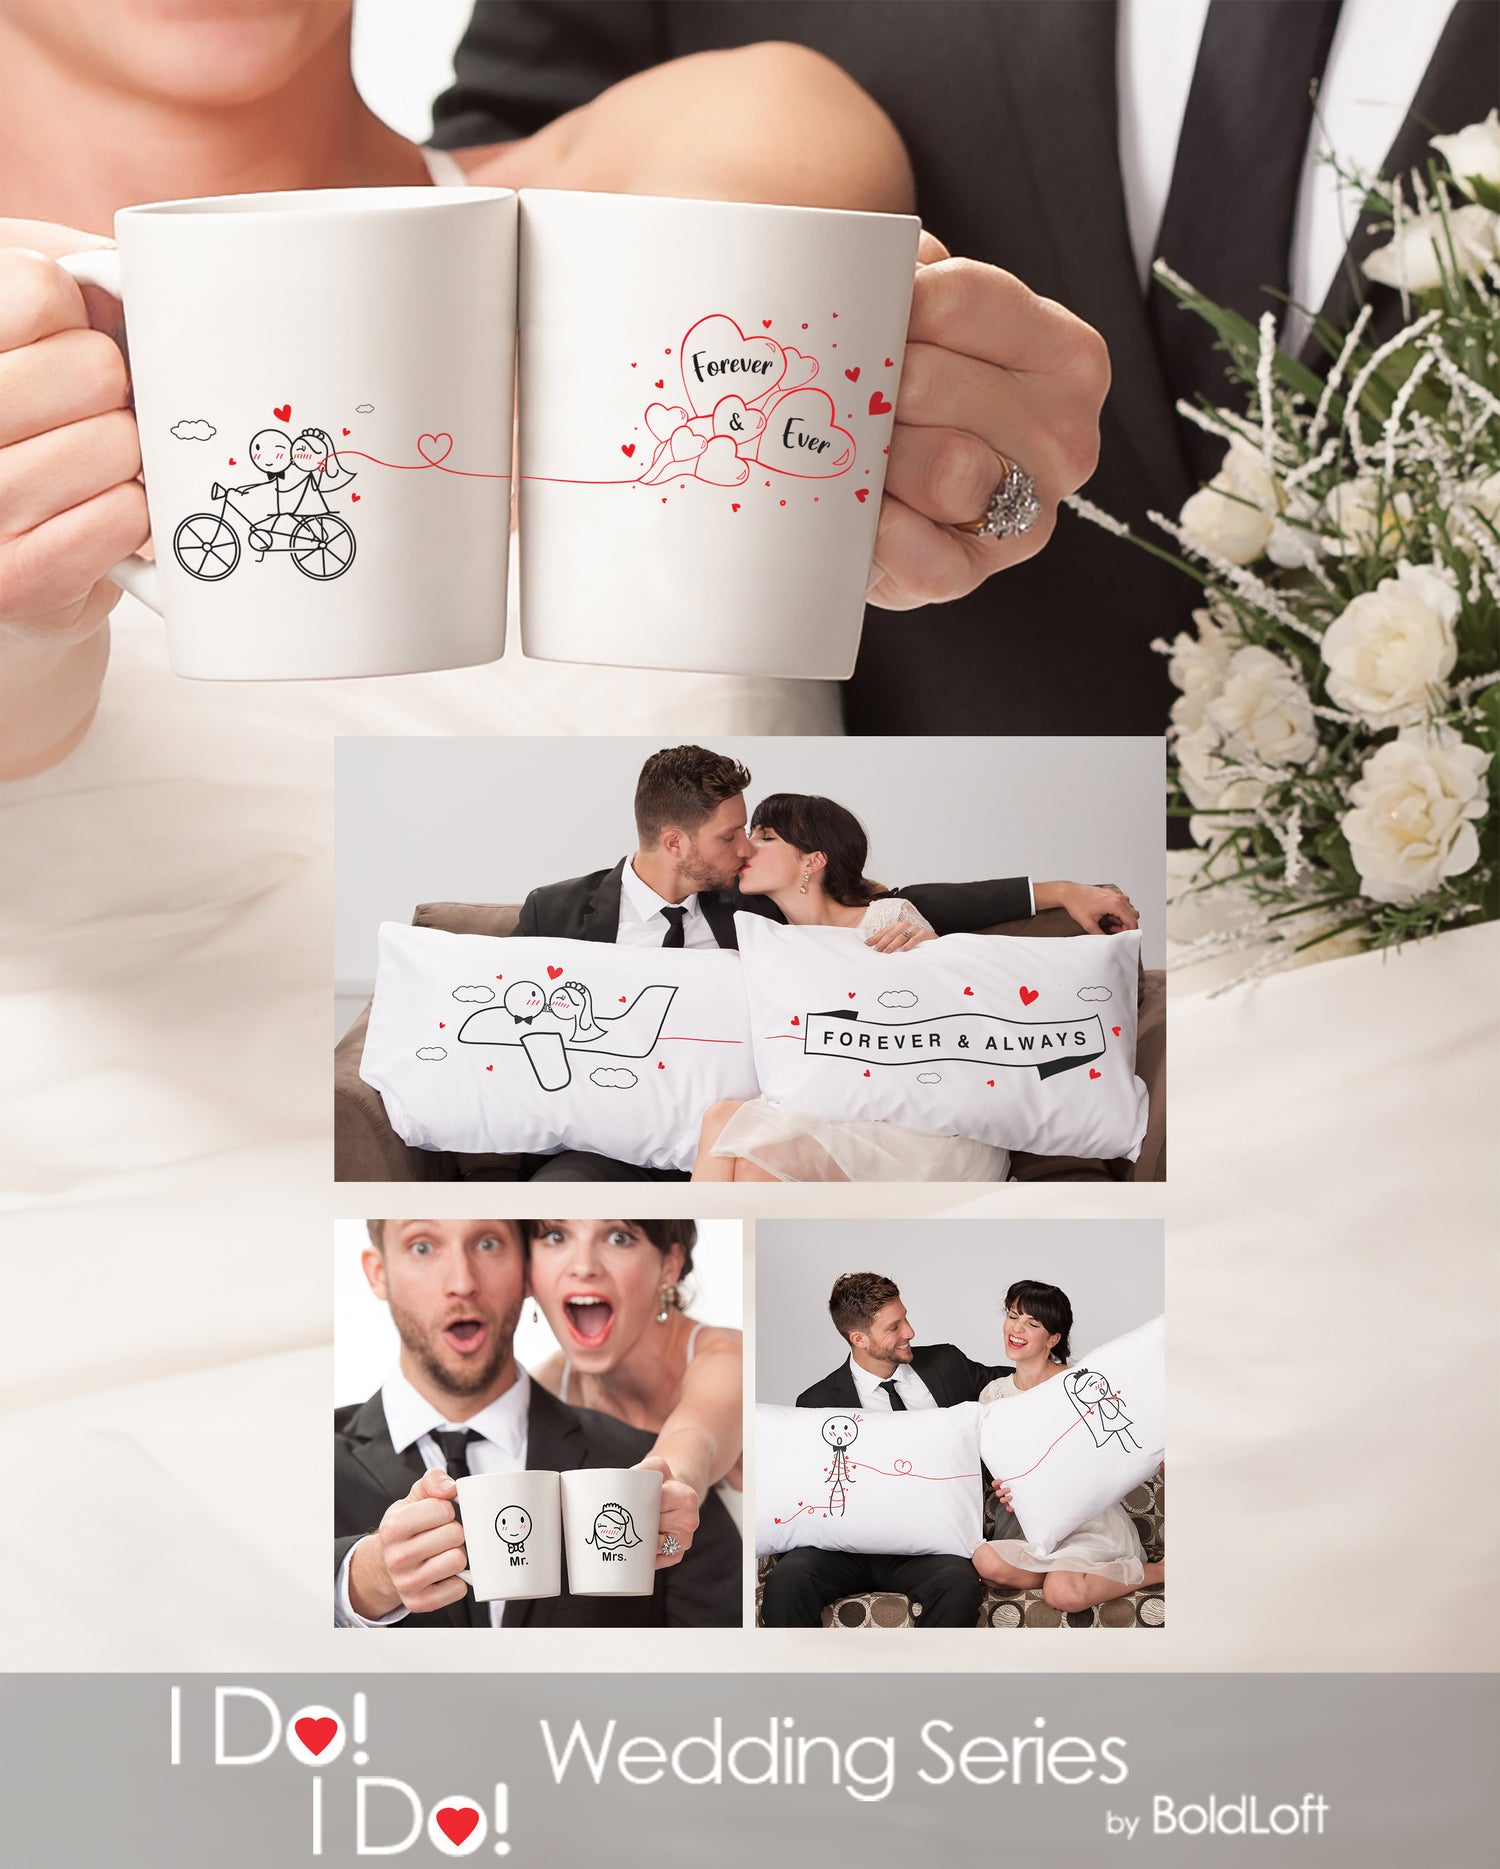 BoldLoft I Do I Do Wedding Series-Wedding gifts for bride and groom. Various designs on couple pillowcases, couple mugs, and drinking glasses, featuring two stick figure representations of a bride and groom, perfect gifts for wedding couples.